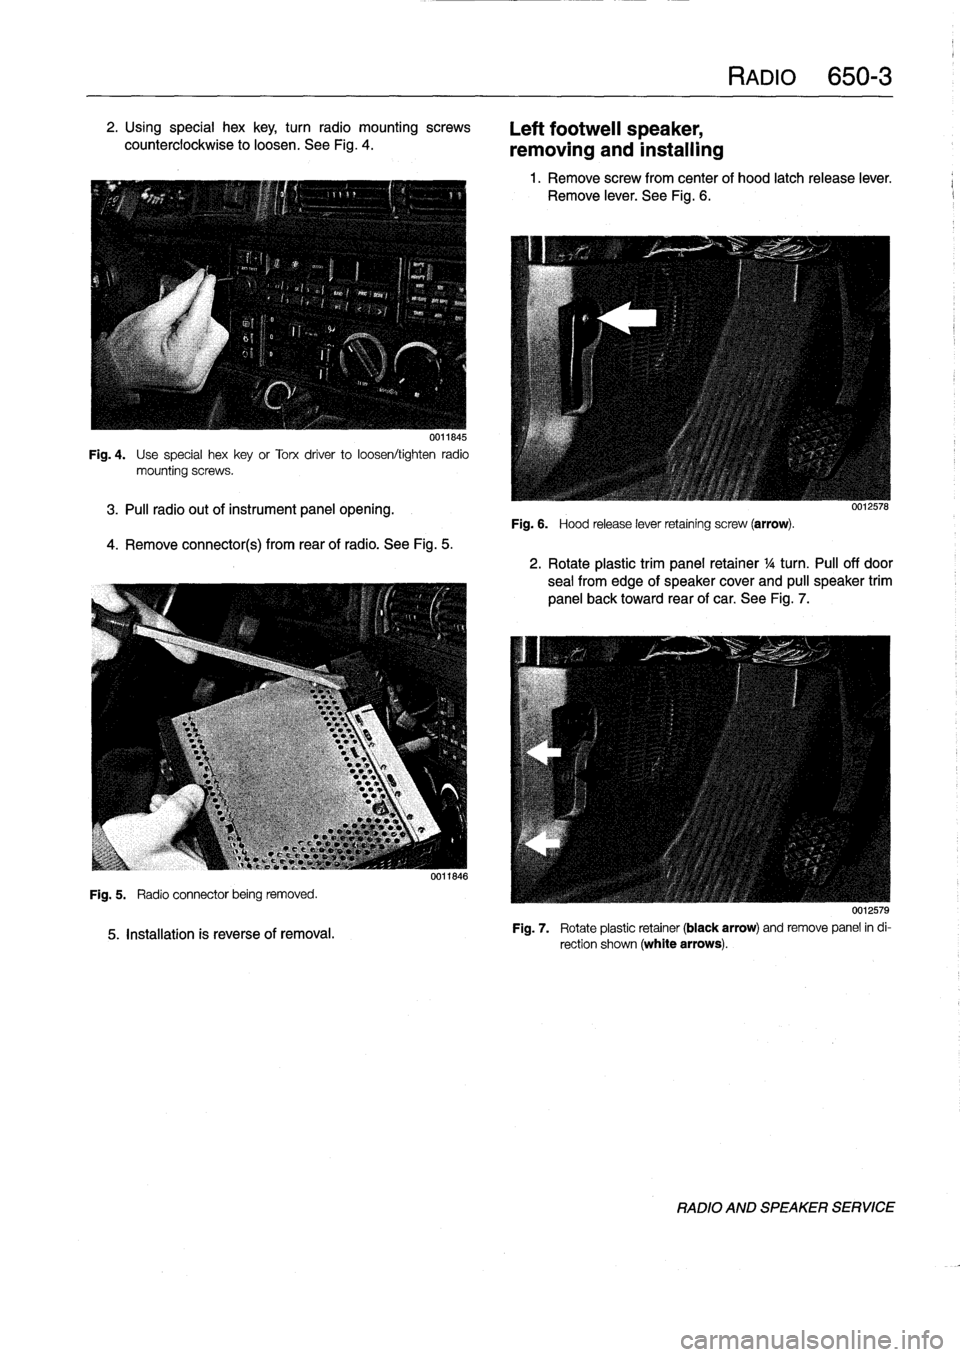 BMW 318i 1997 E36 Owners Guide 2
.
Using
special
hex
key,
turn
radio
mountingscrews

counterclockwise
to
loosen
.
See
Fig
.
4
.

0011845

Fig
.
4
.

	

Use
special
hexkey
or
Torx
driver
to
loosen/tighten
radio
mountingscrews
.

3
.